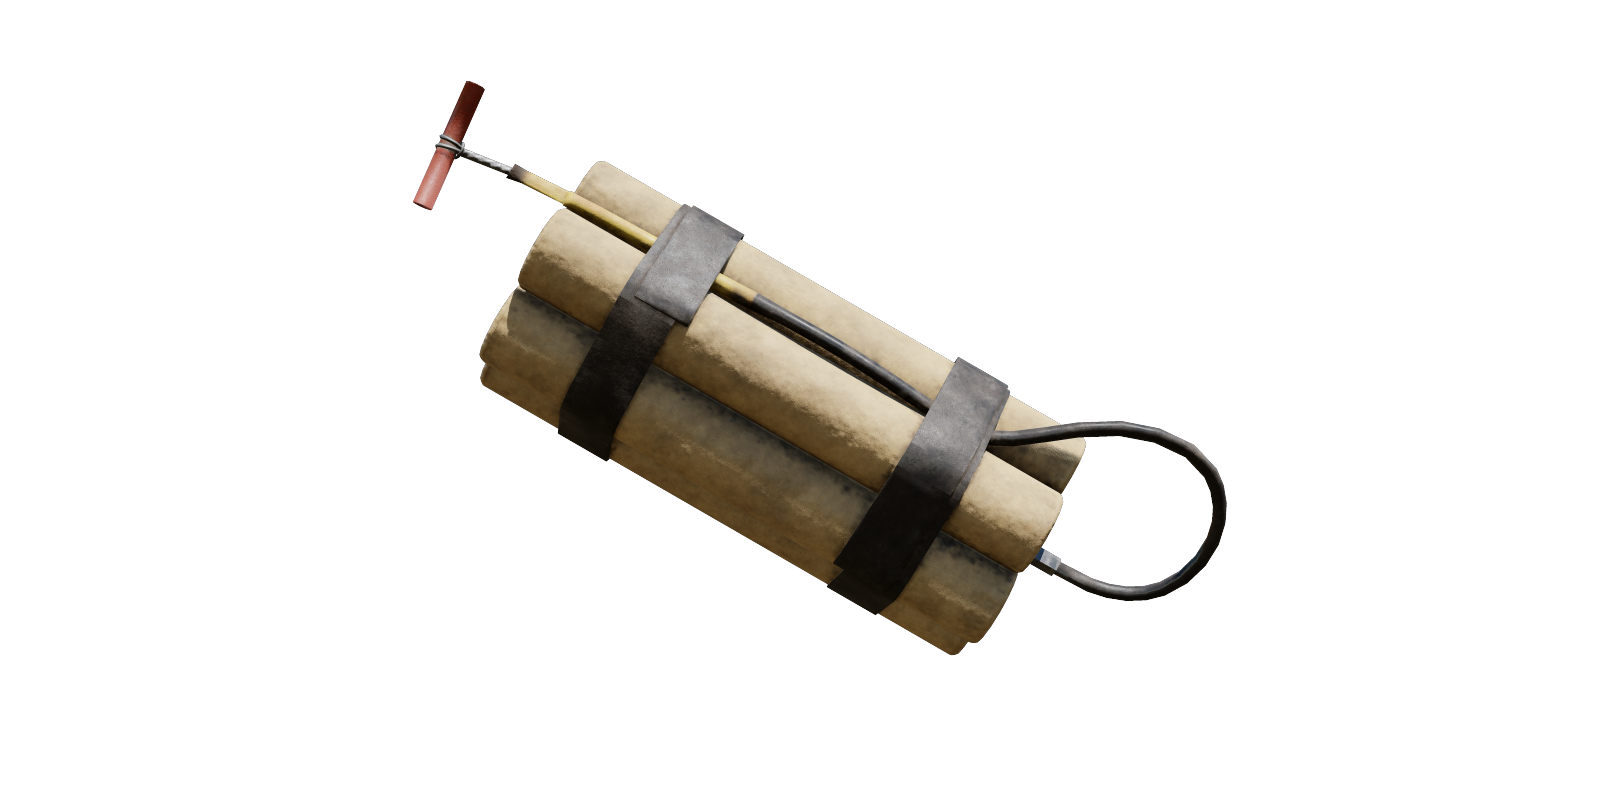 Explosion pack item.png